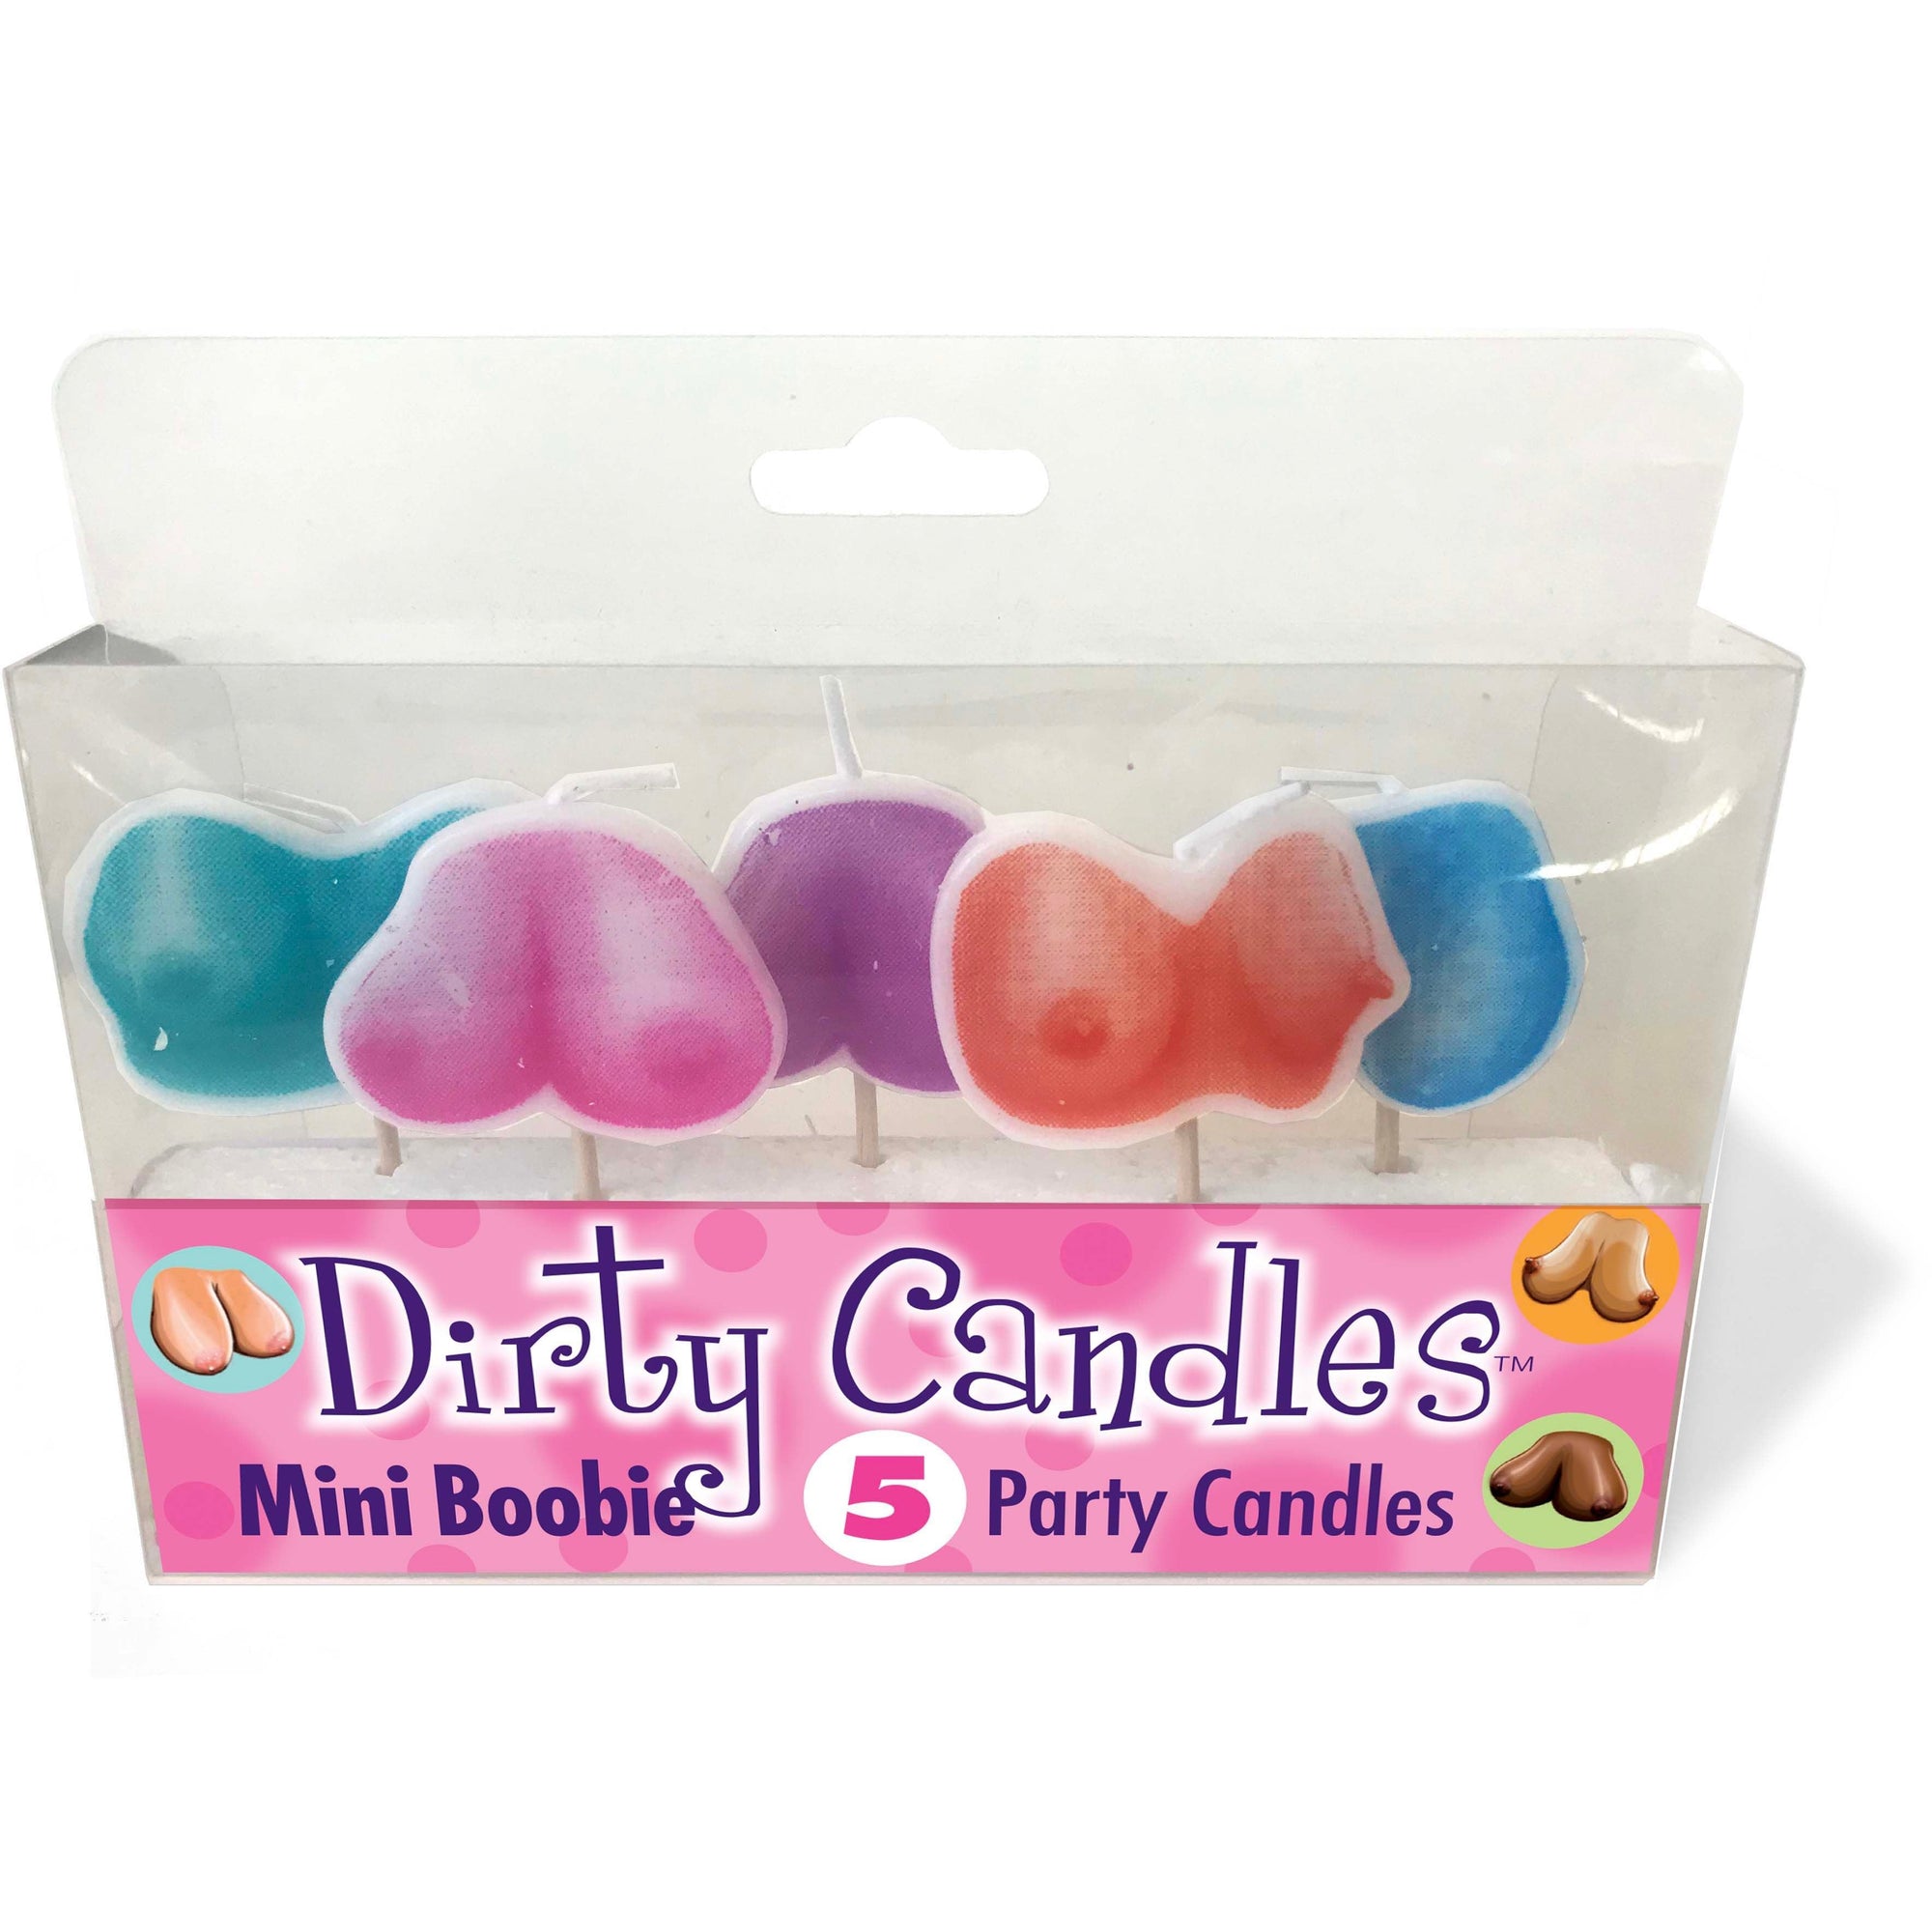 Dirty Candles Boobs 5pk by Little Geenie